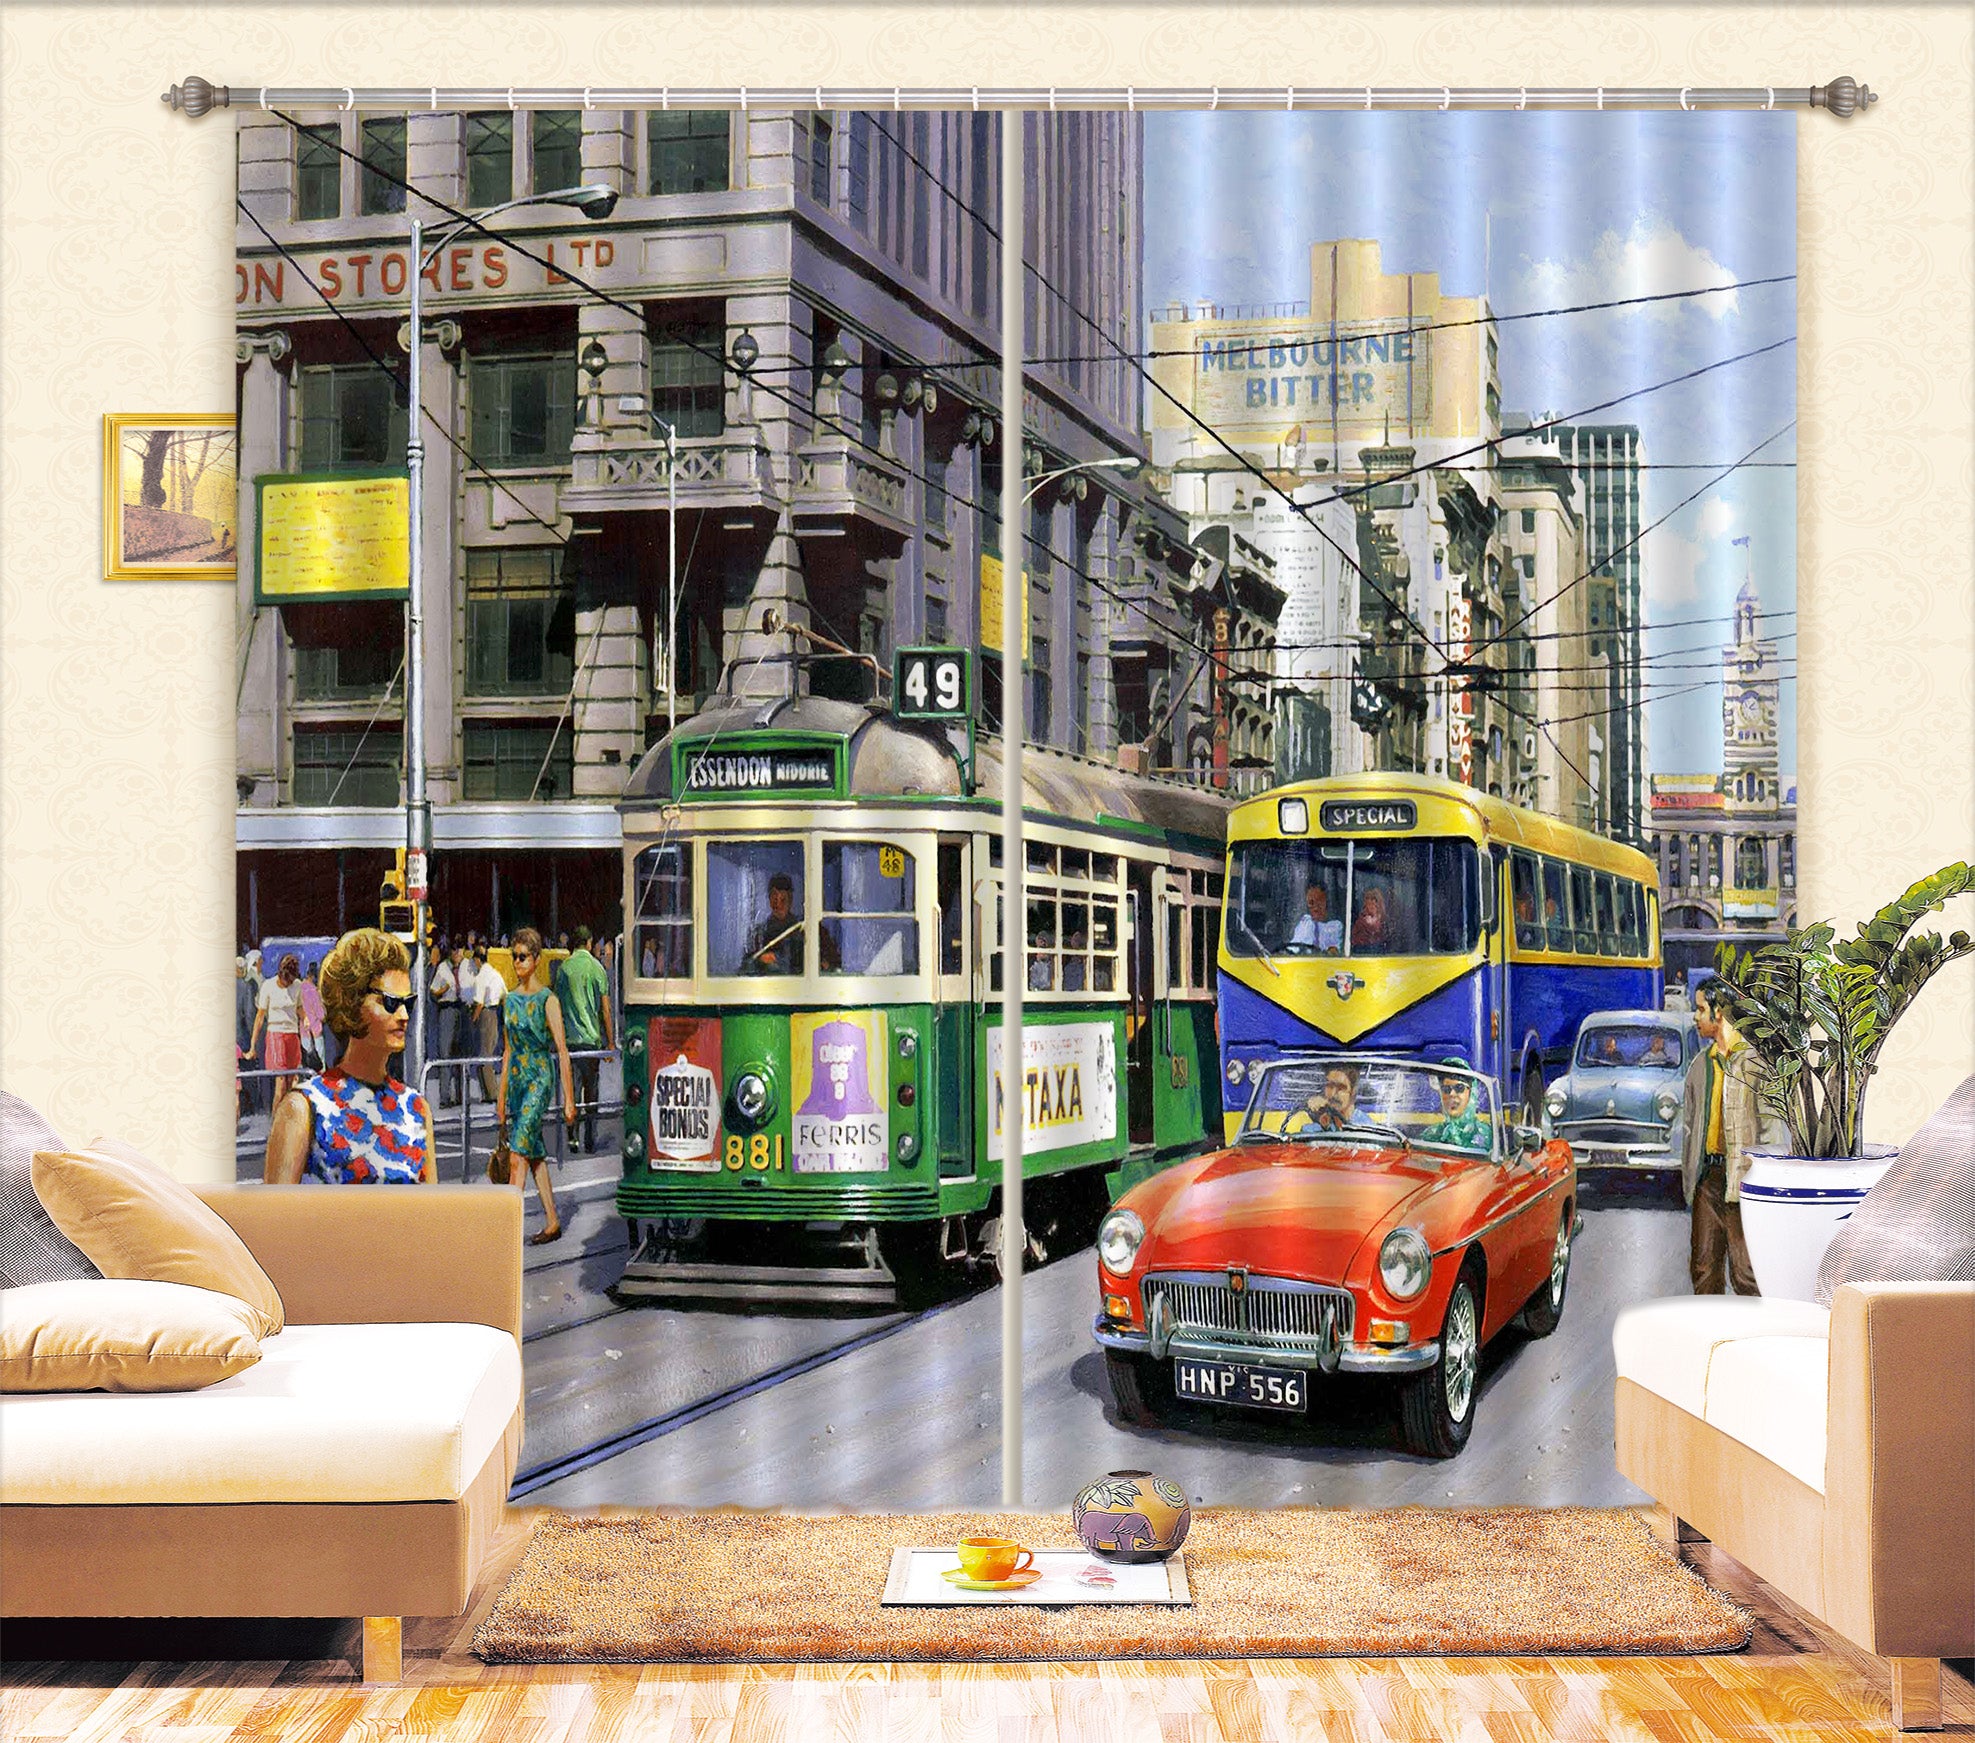 3D Street Vehicle 154 Kevin Walsh Curtain Curtains Drapes